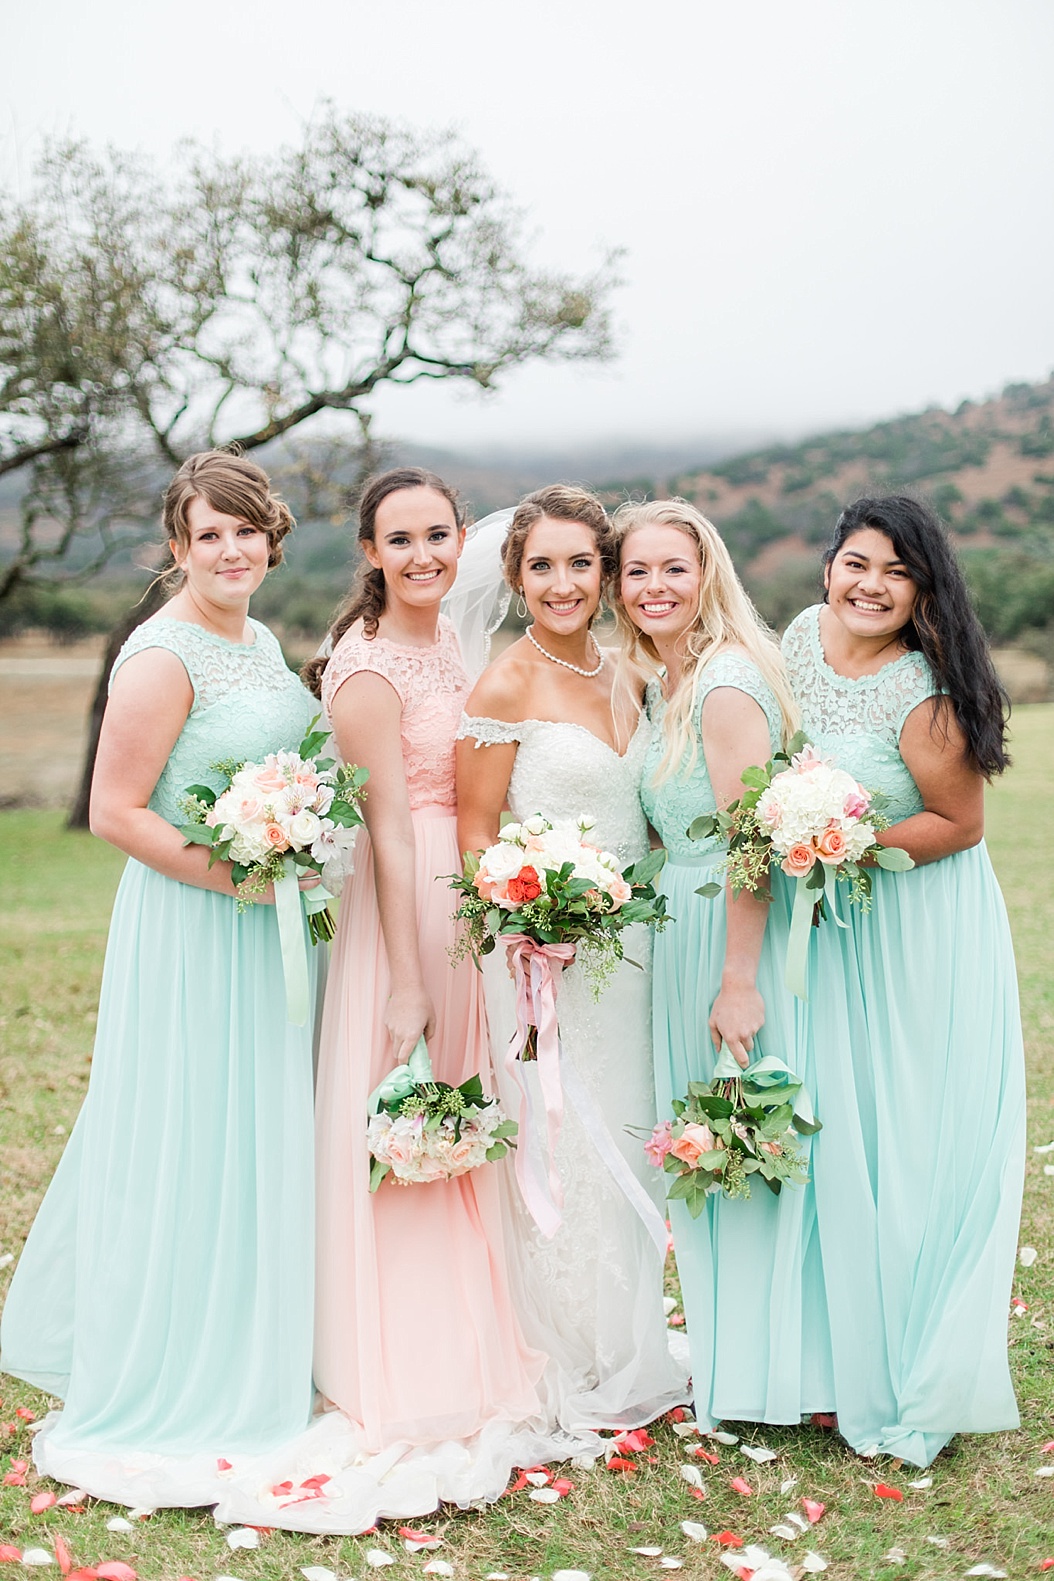 A Peach and Mint Country Chic Wedding at Happy H Ranch by Allison Jeffers Wedding Photography. Comfort Wedding Photographer 0070